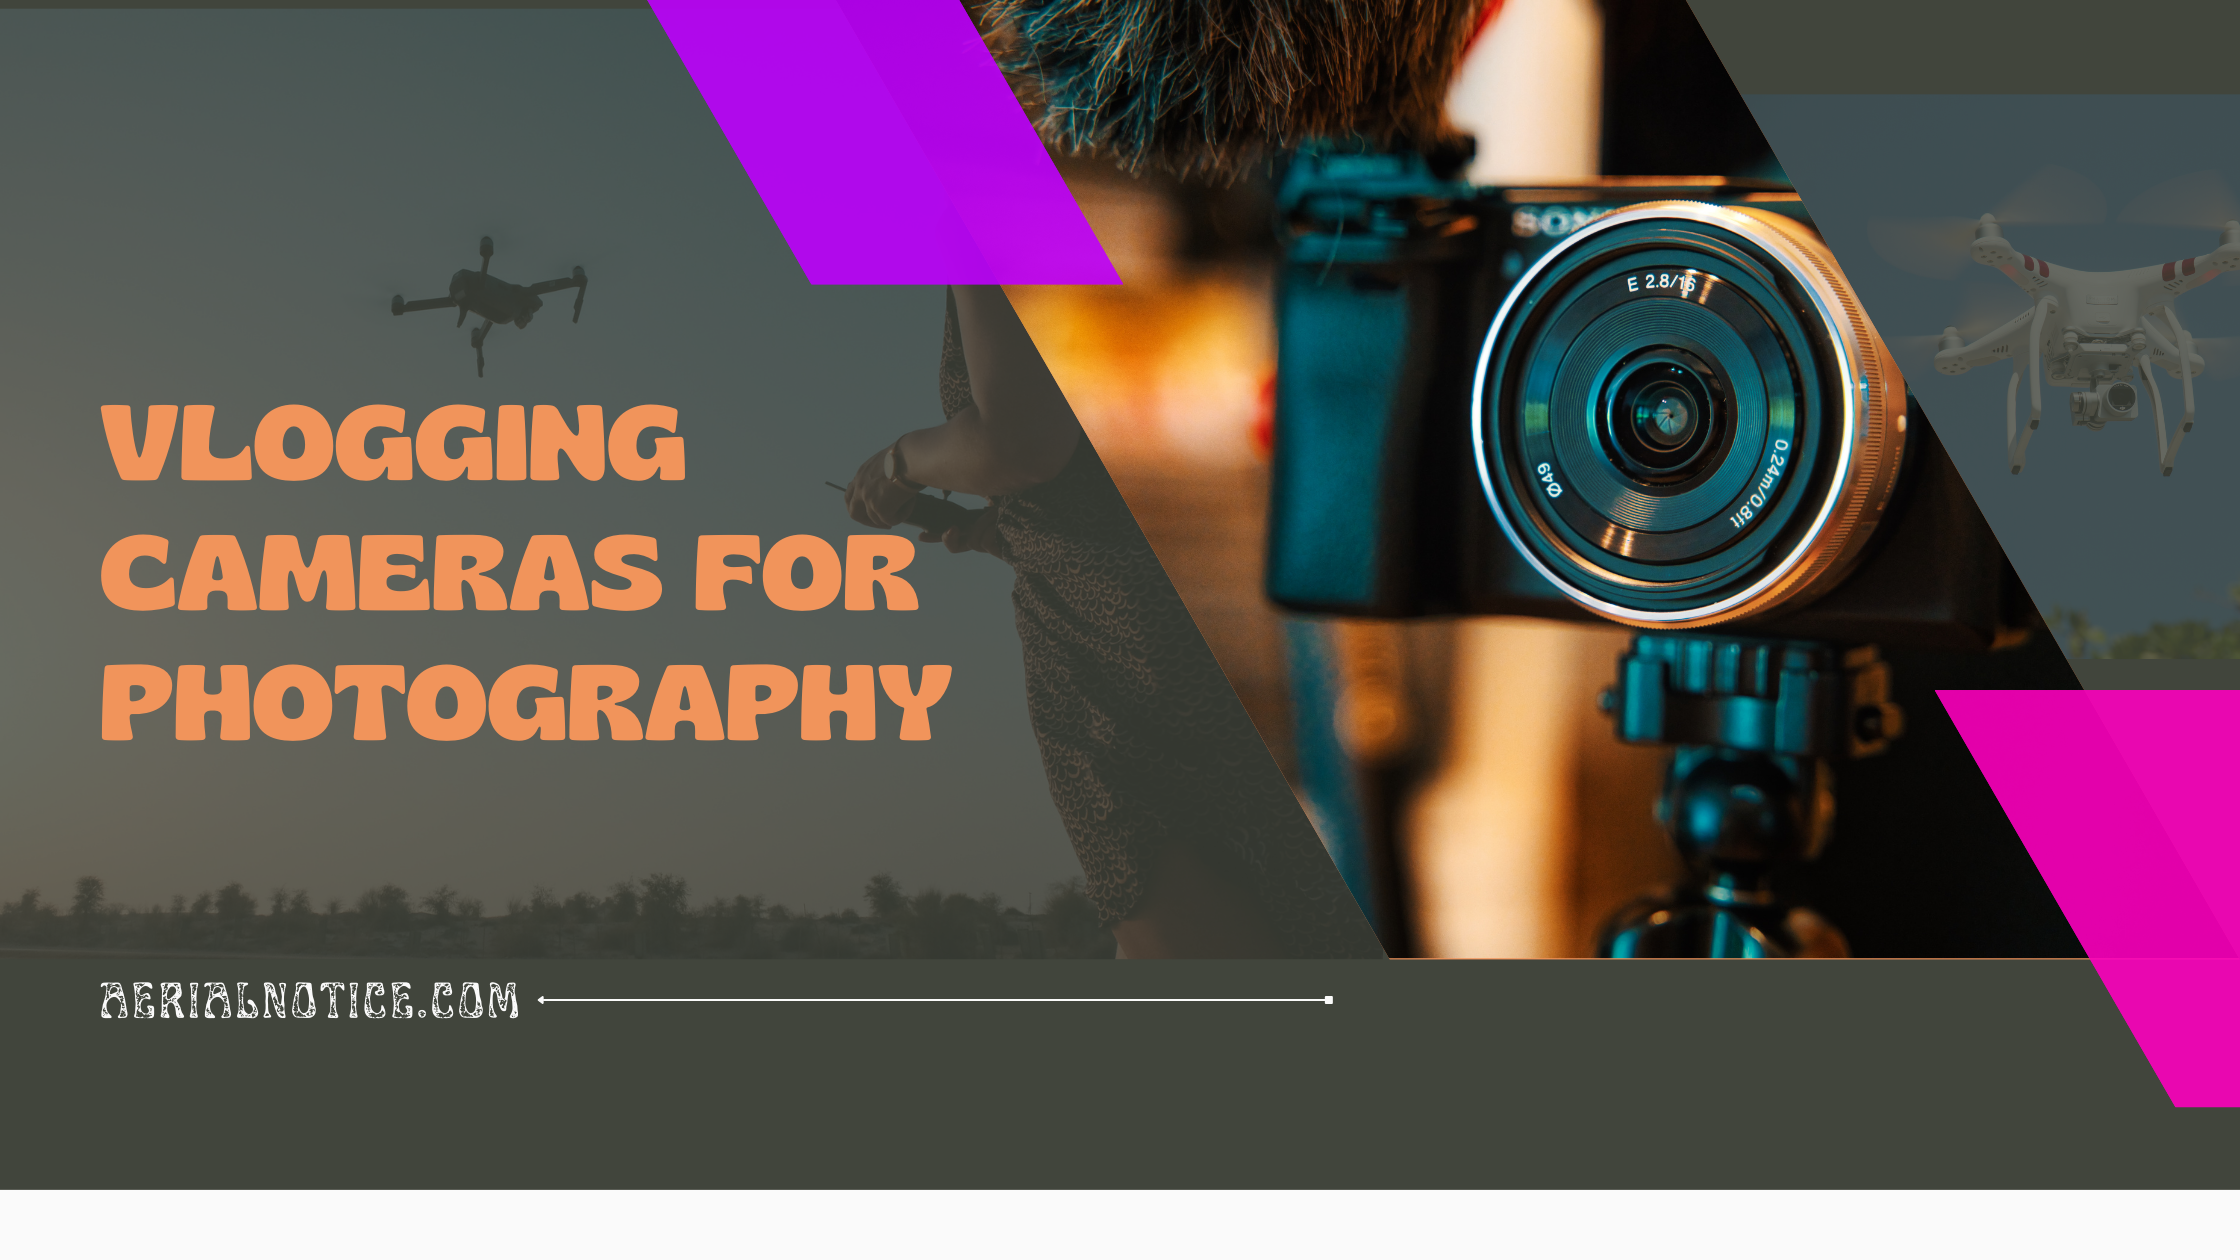 Vlogging Cameras for Photography